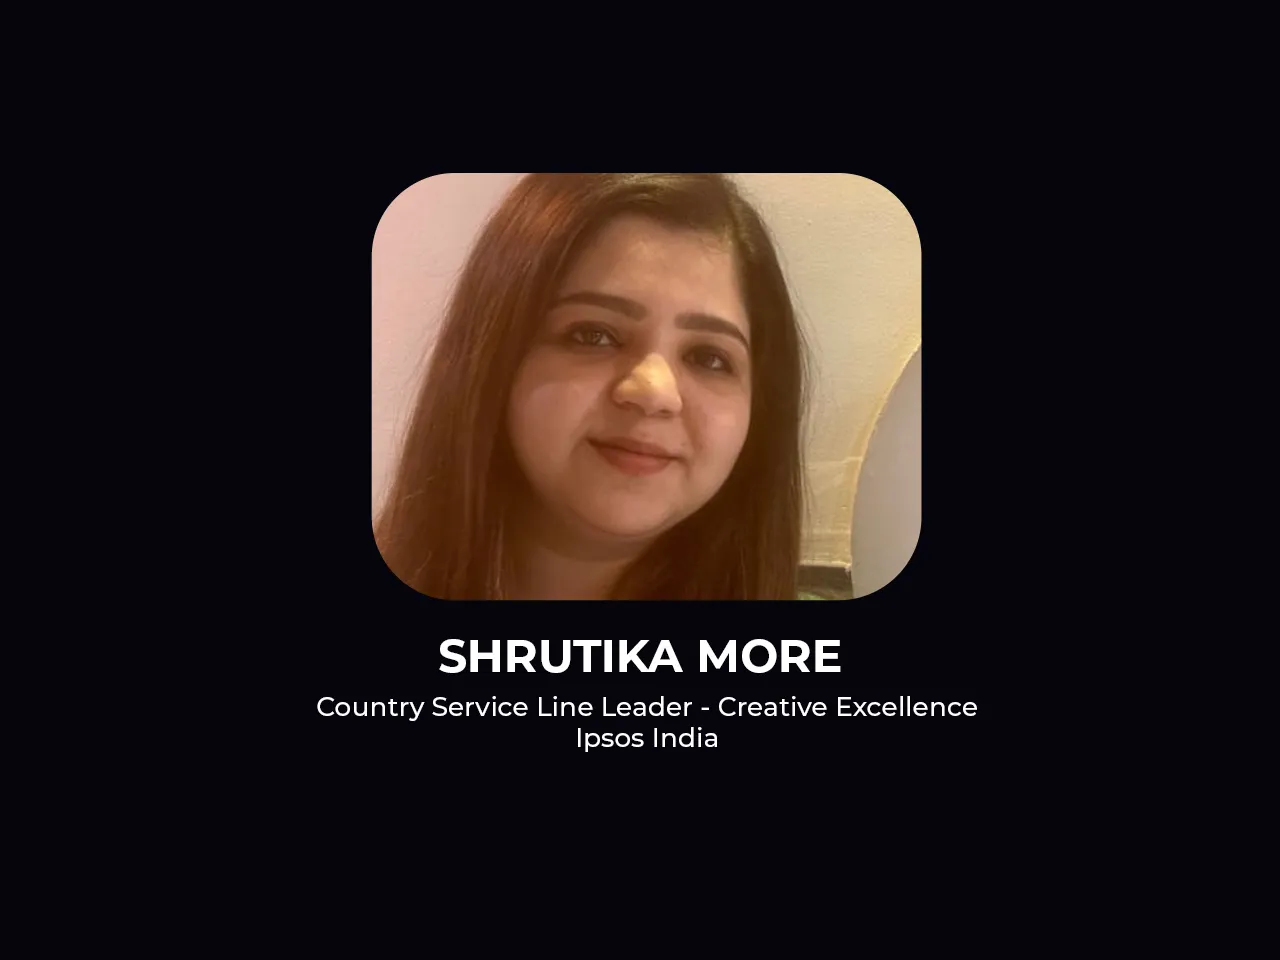 Ipsos India hires Shrutika More to lead Creative Excellence vertical